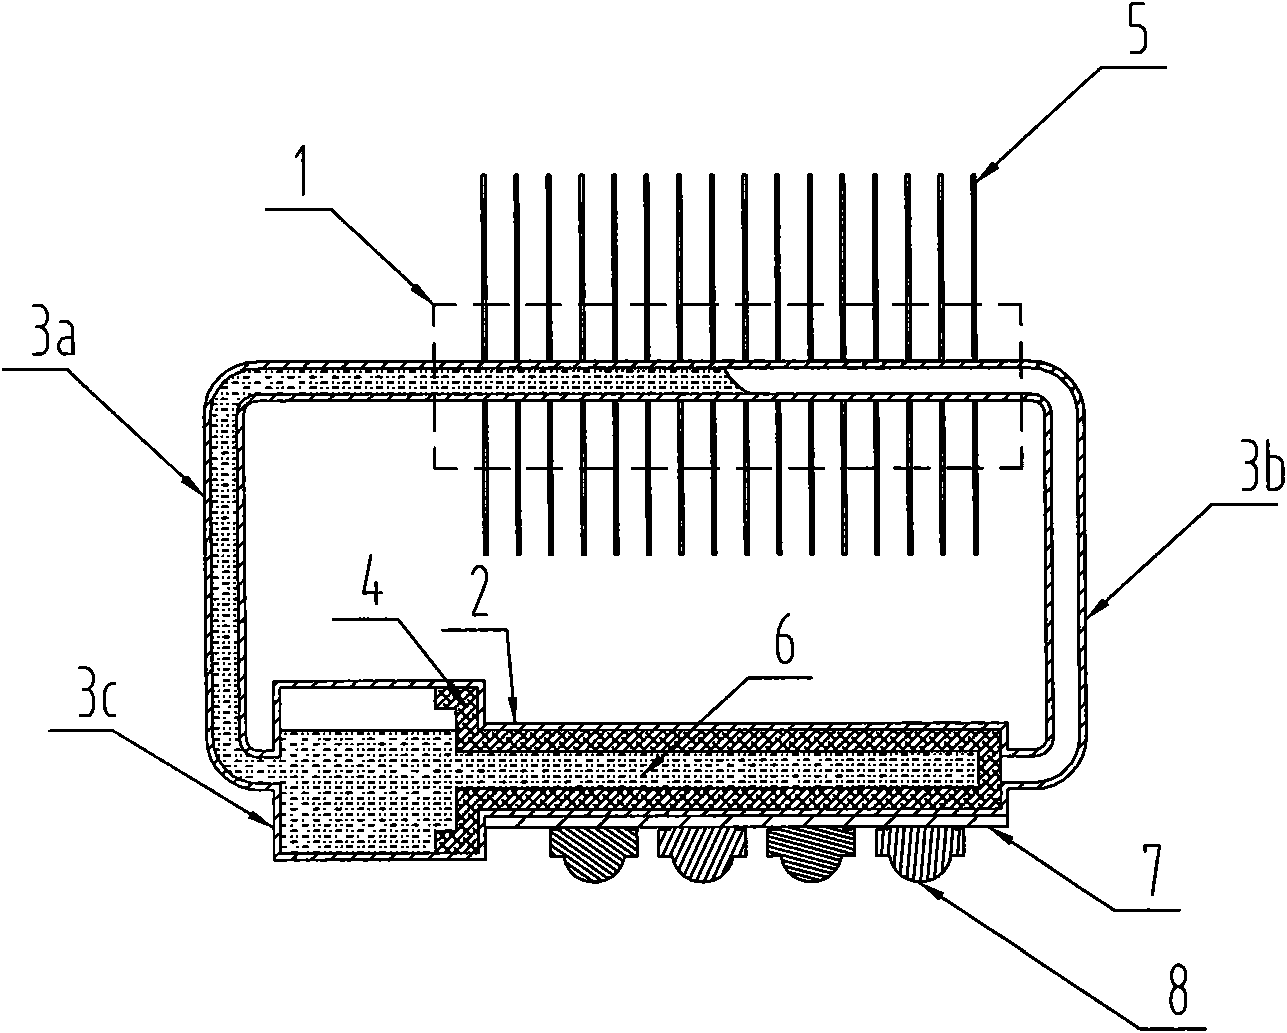 Heat radiation device for loop heat pipe with enhanced evaporation section used in LED lamp